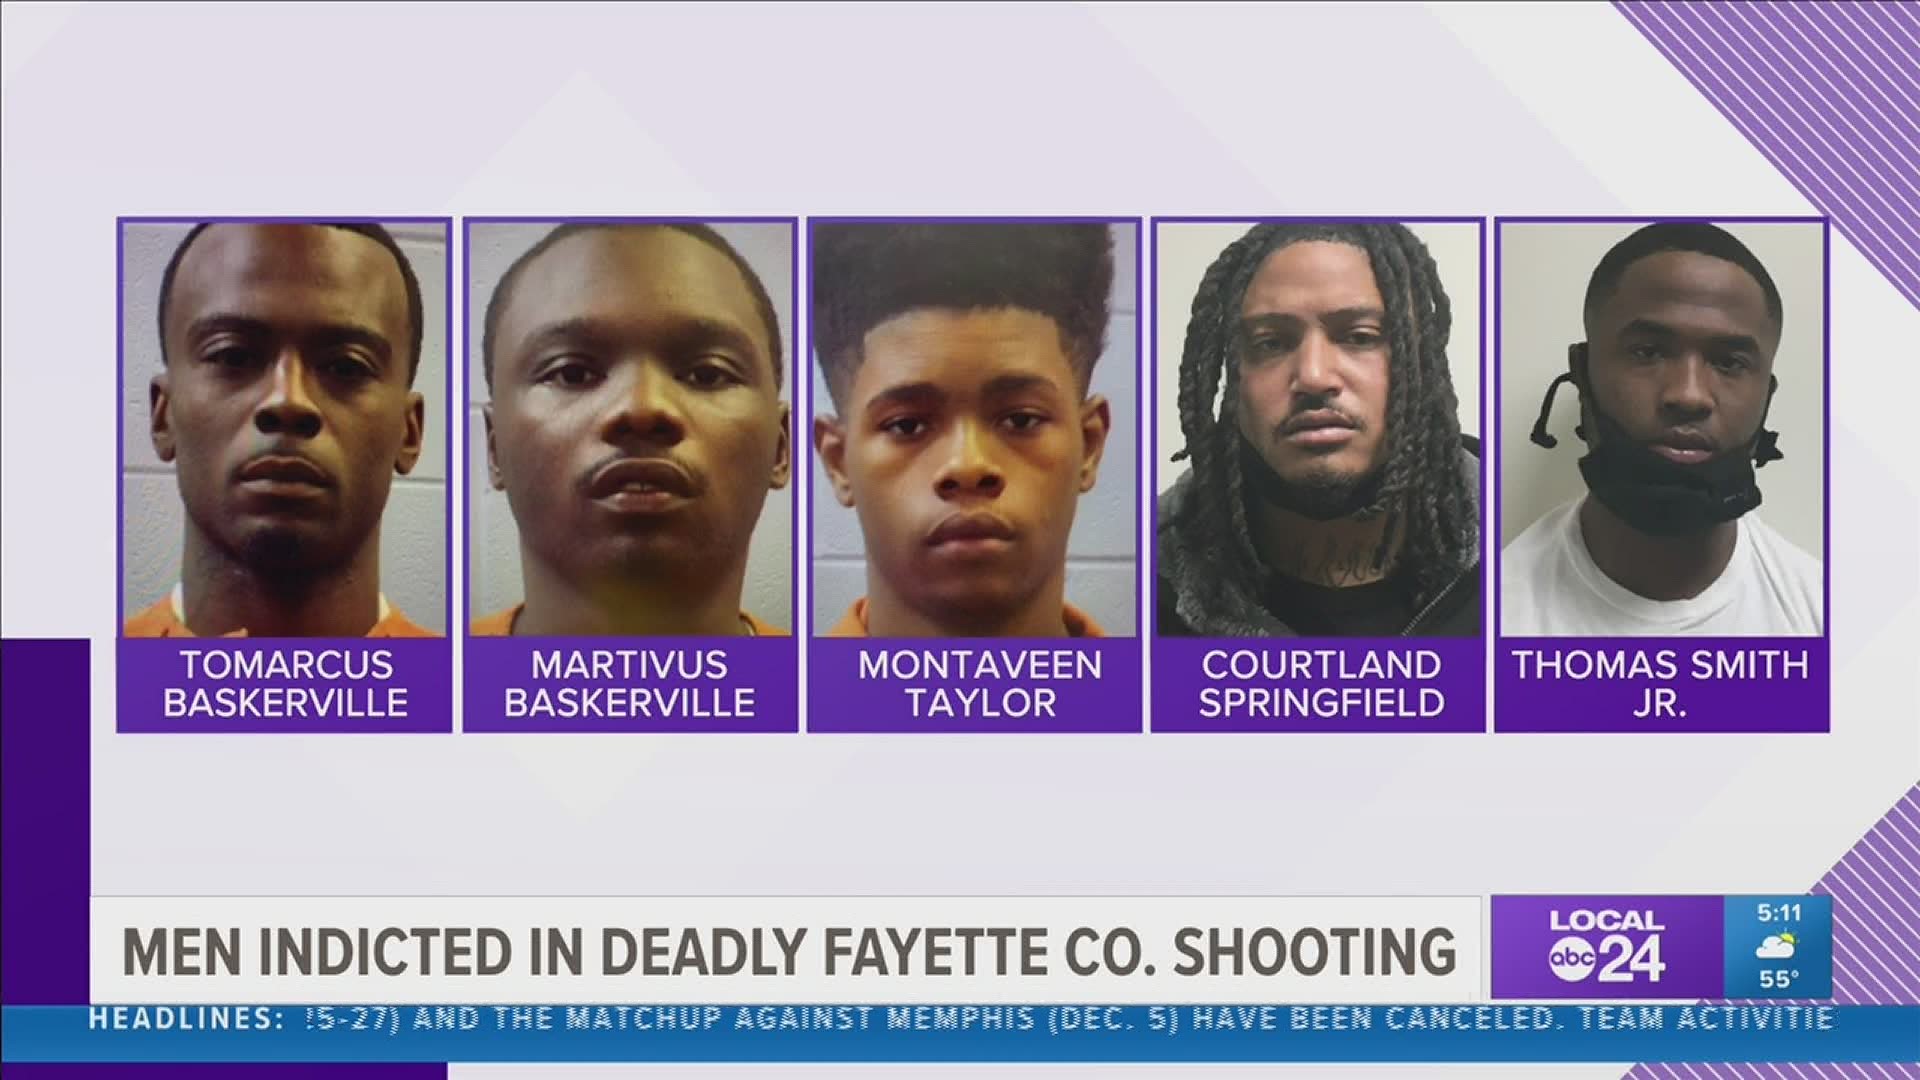 The five men are charged in connection to an August shooting in Fayette County that left one person dead and four others injured.